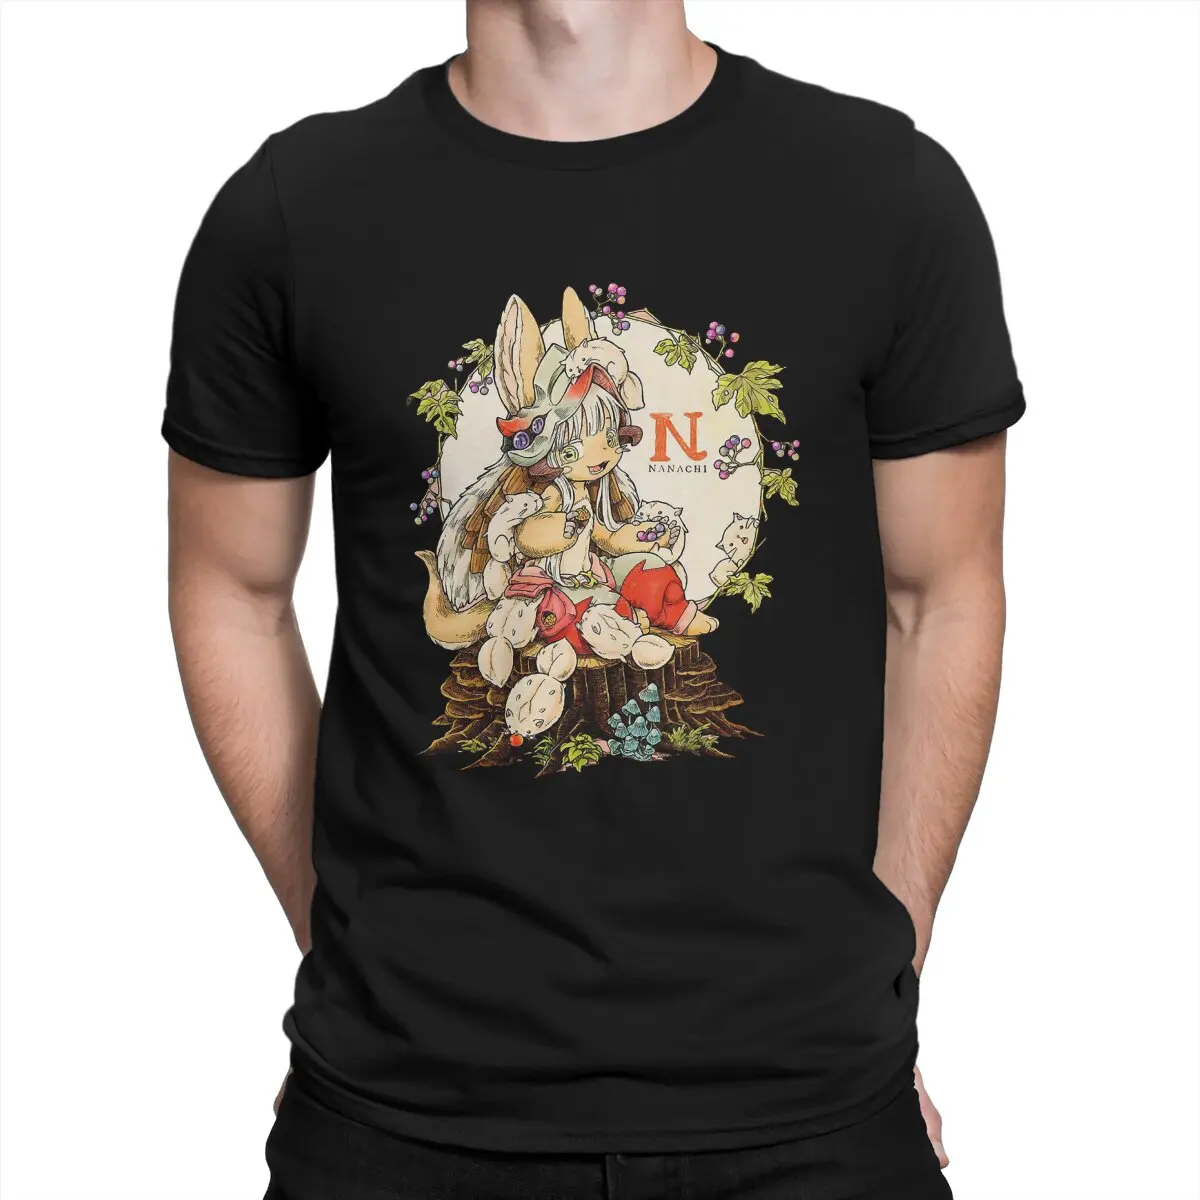 

Nanachi and Cutie Animals T Shirts for Men Cotton Vintage T-Shirt Round Collar Made In Abyss Tees Short Sleeve Clothes Graphic